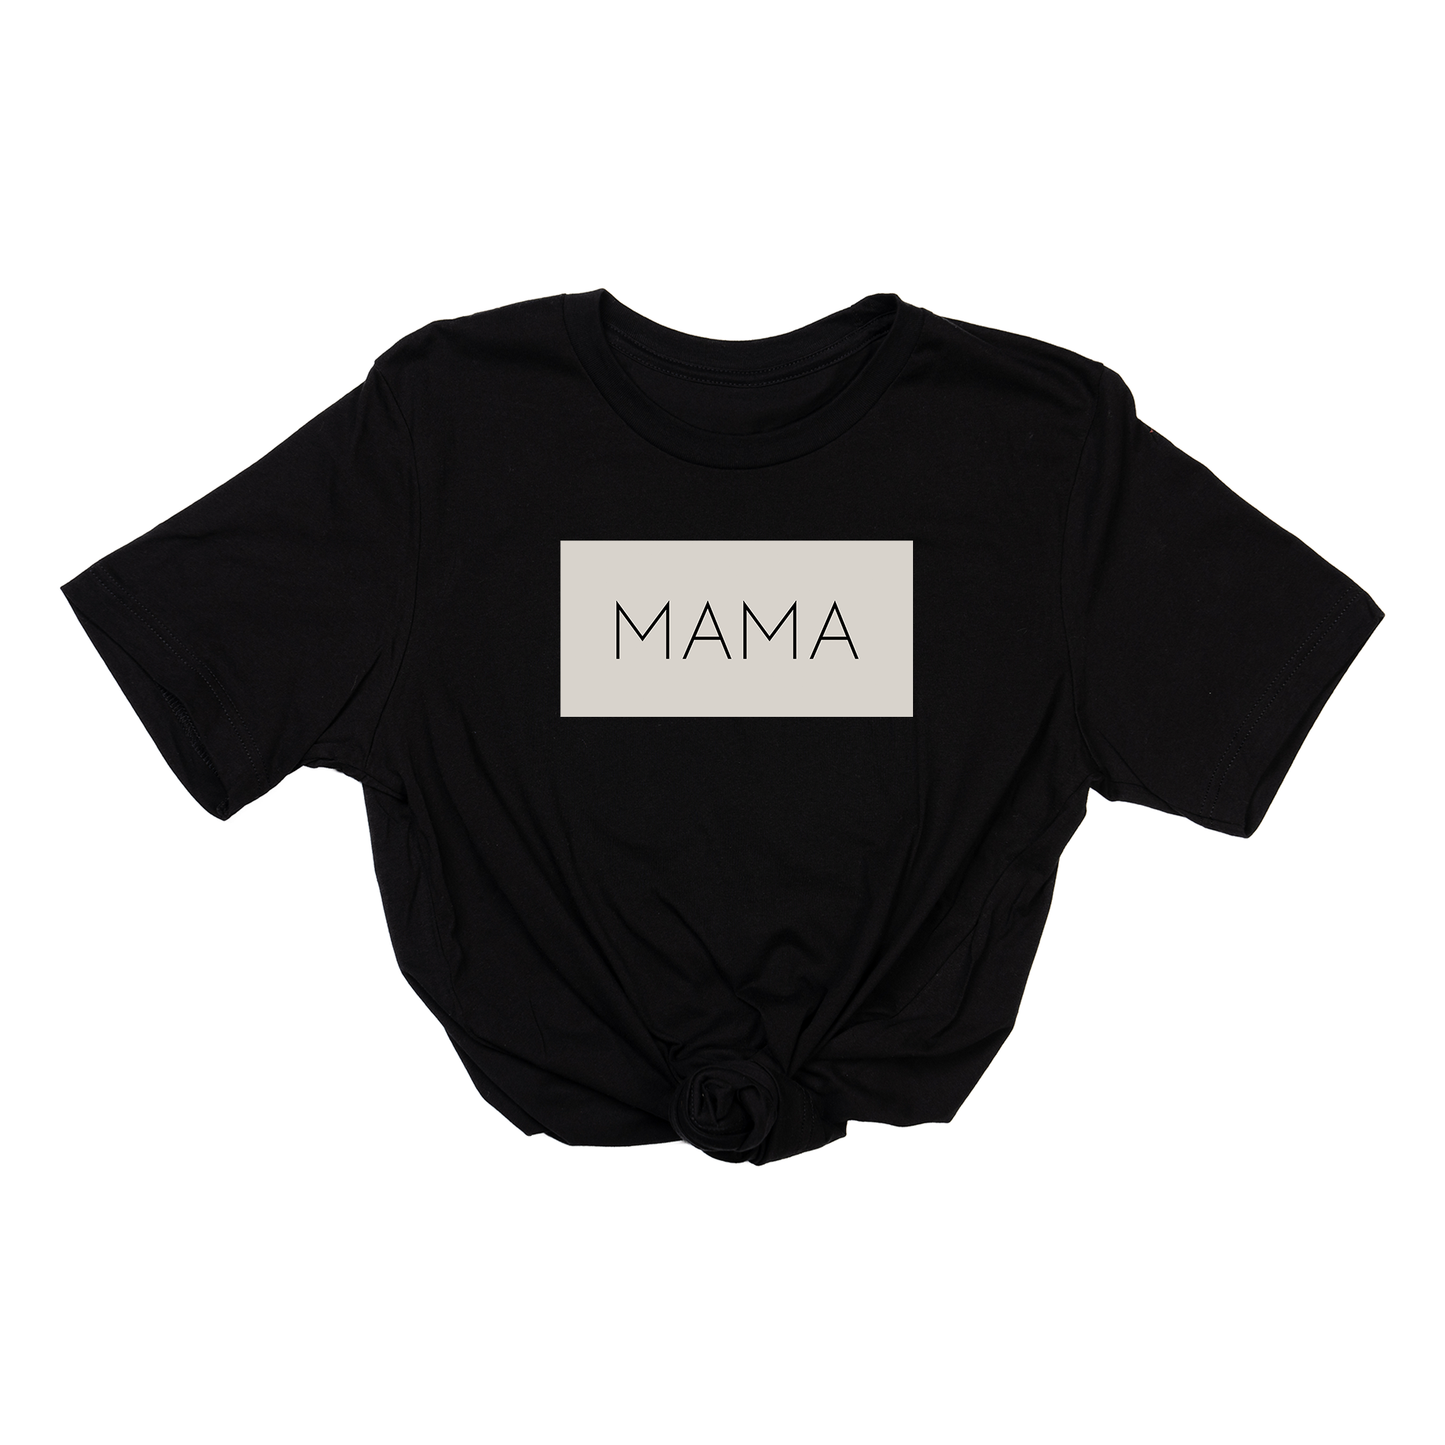 Mama (Boxed Collection, Stone Box/Black Text, Across Front) - Tee (Black)